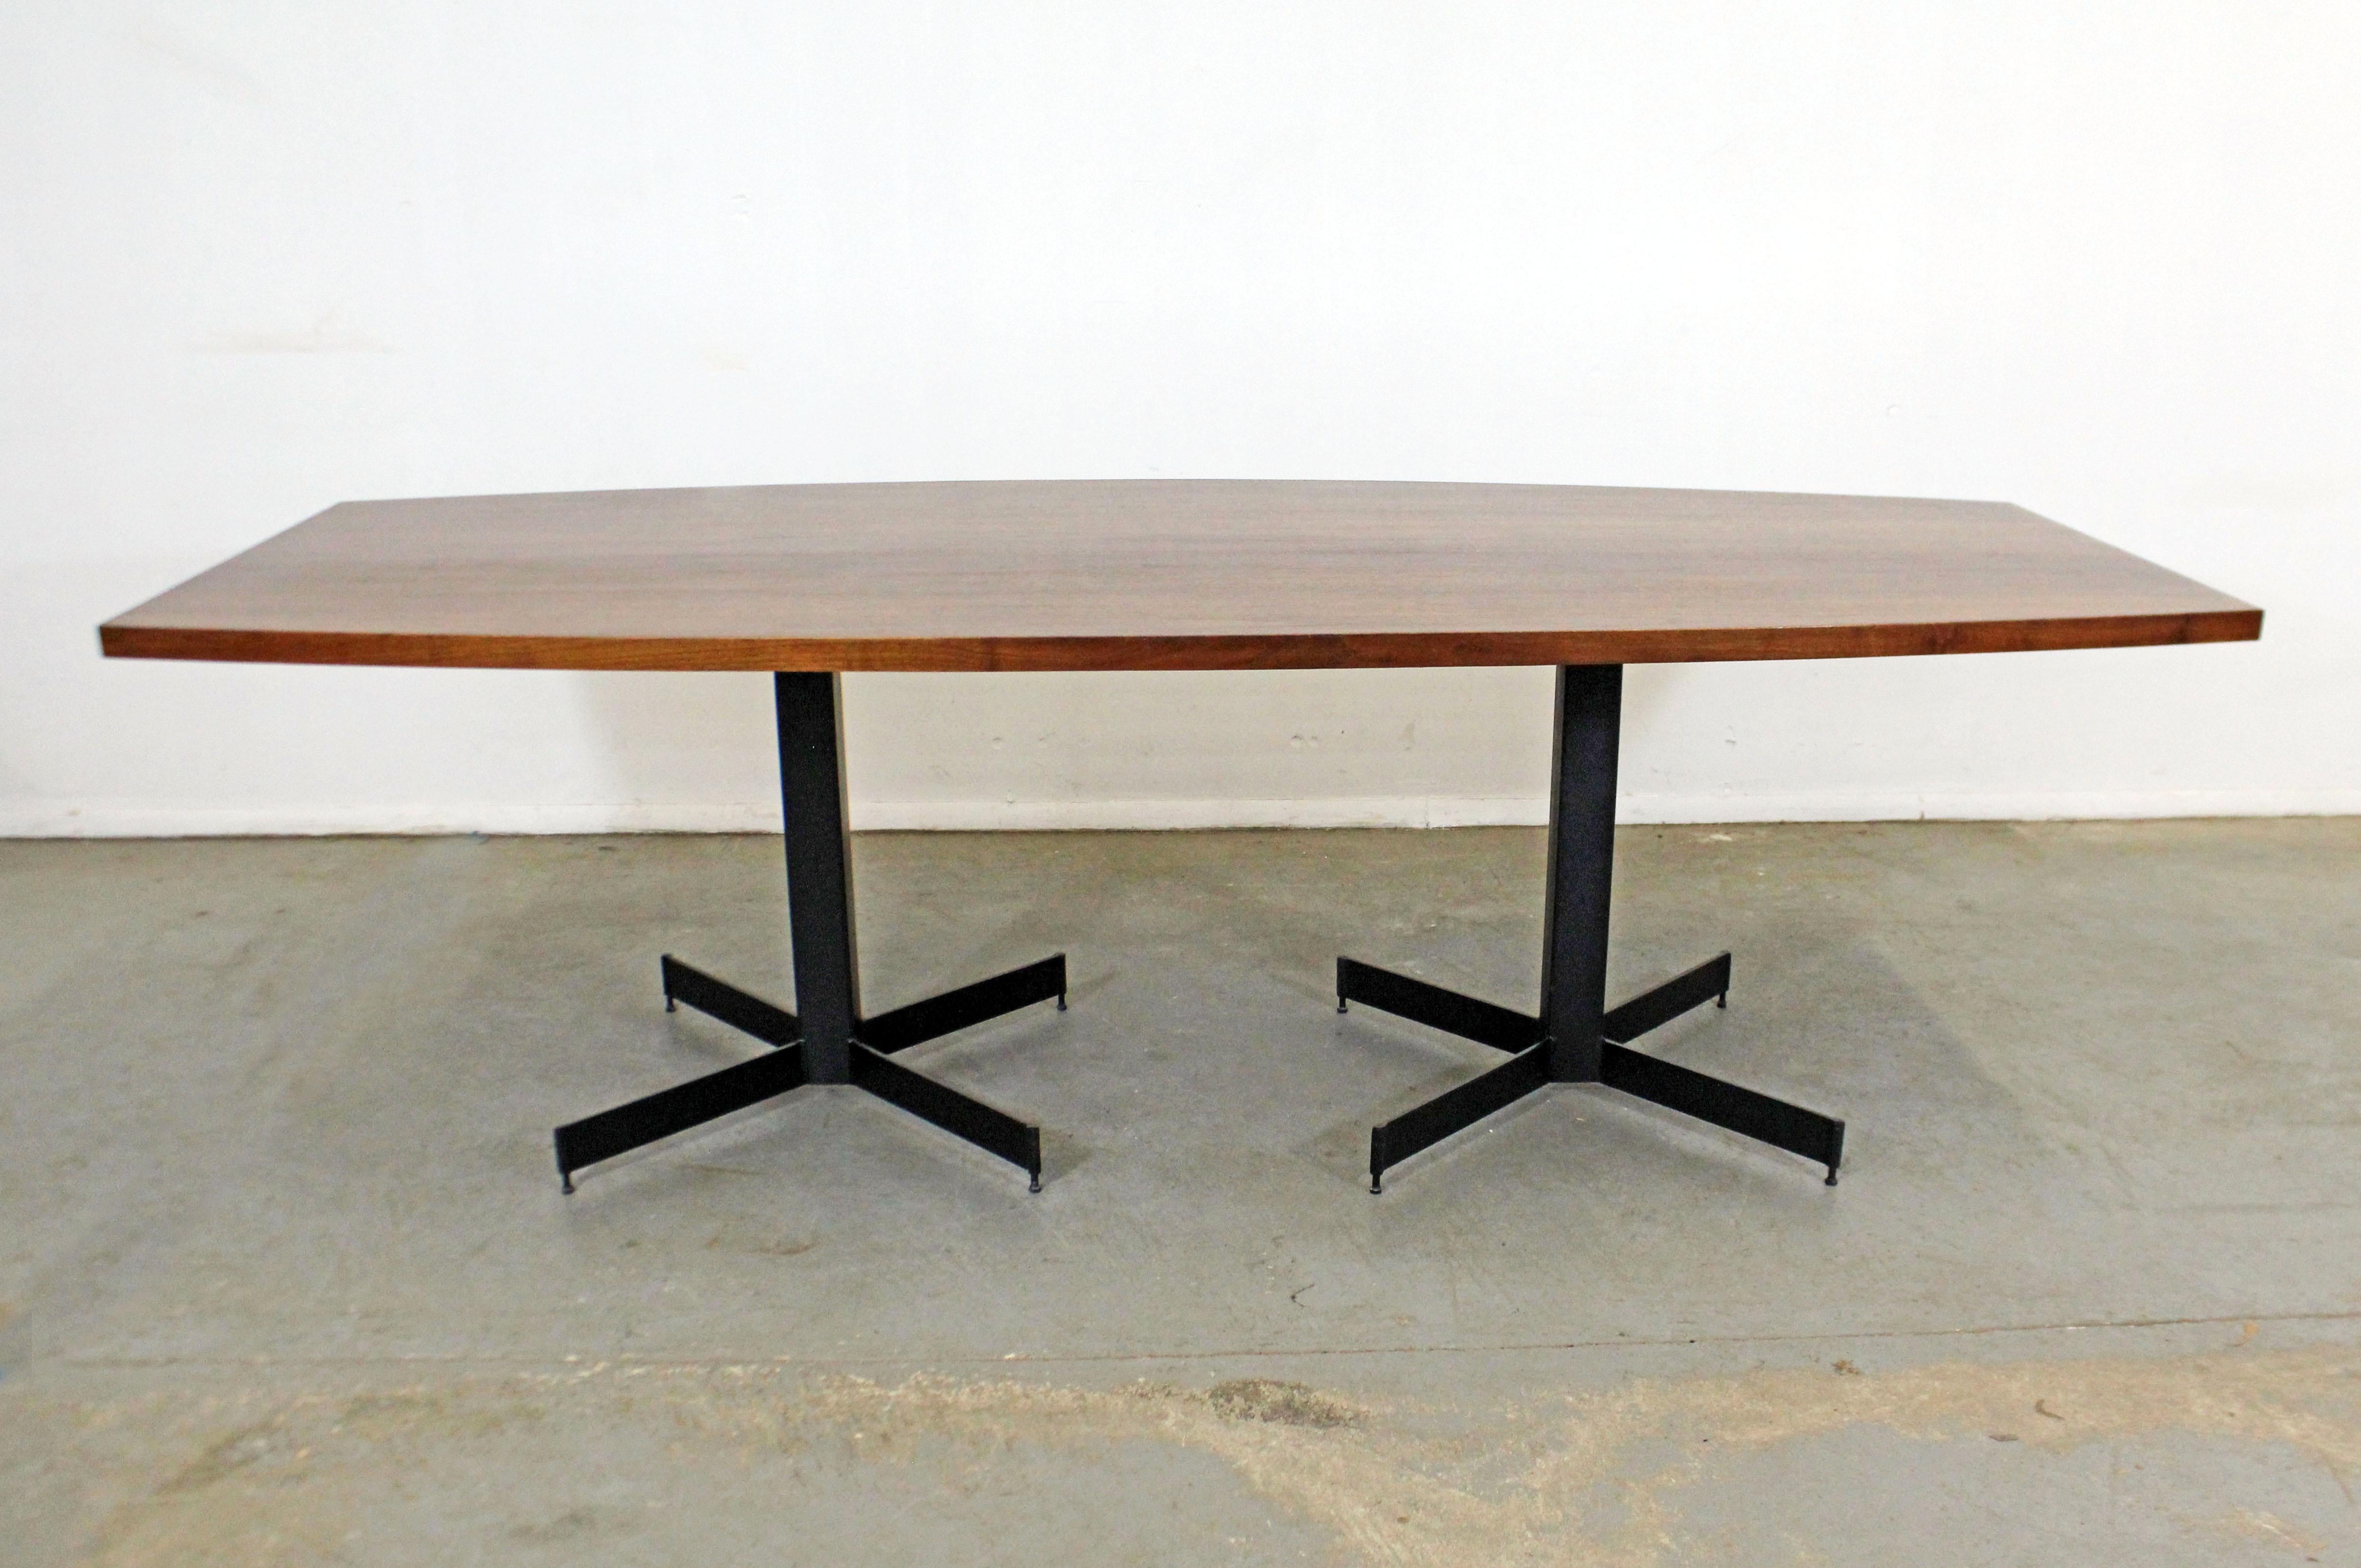 Offered is a large Mid-Century Modern conference/dining table. This table has been recently restored with a refinished walnut 
surfboard-shaped top and two black pedestal bases. In good condition for its age with some surface scratches throughout.